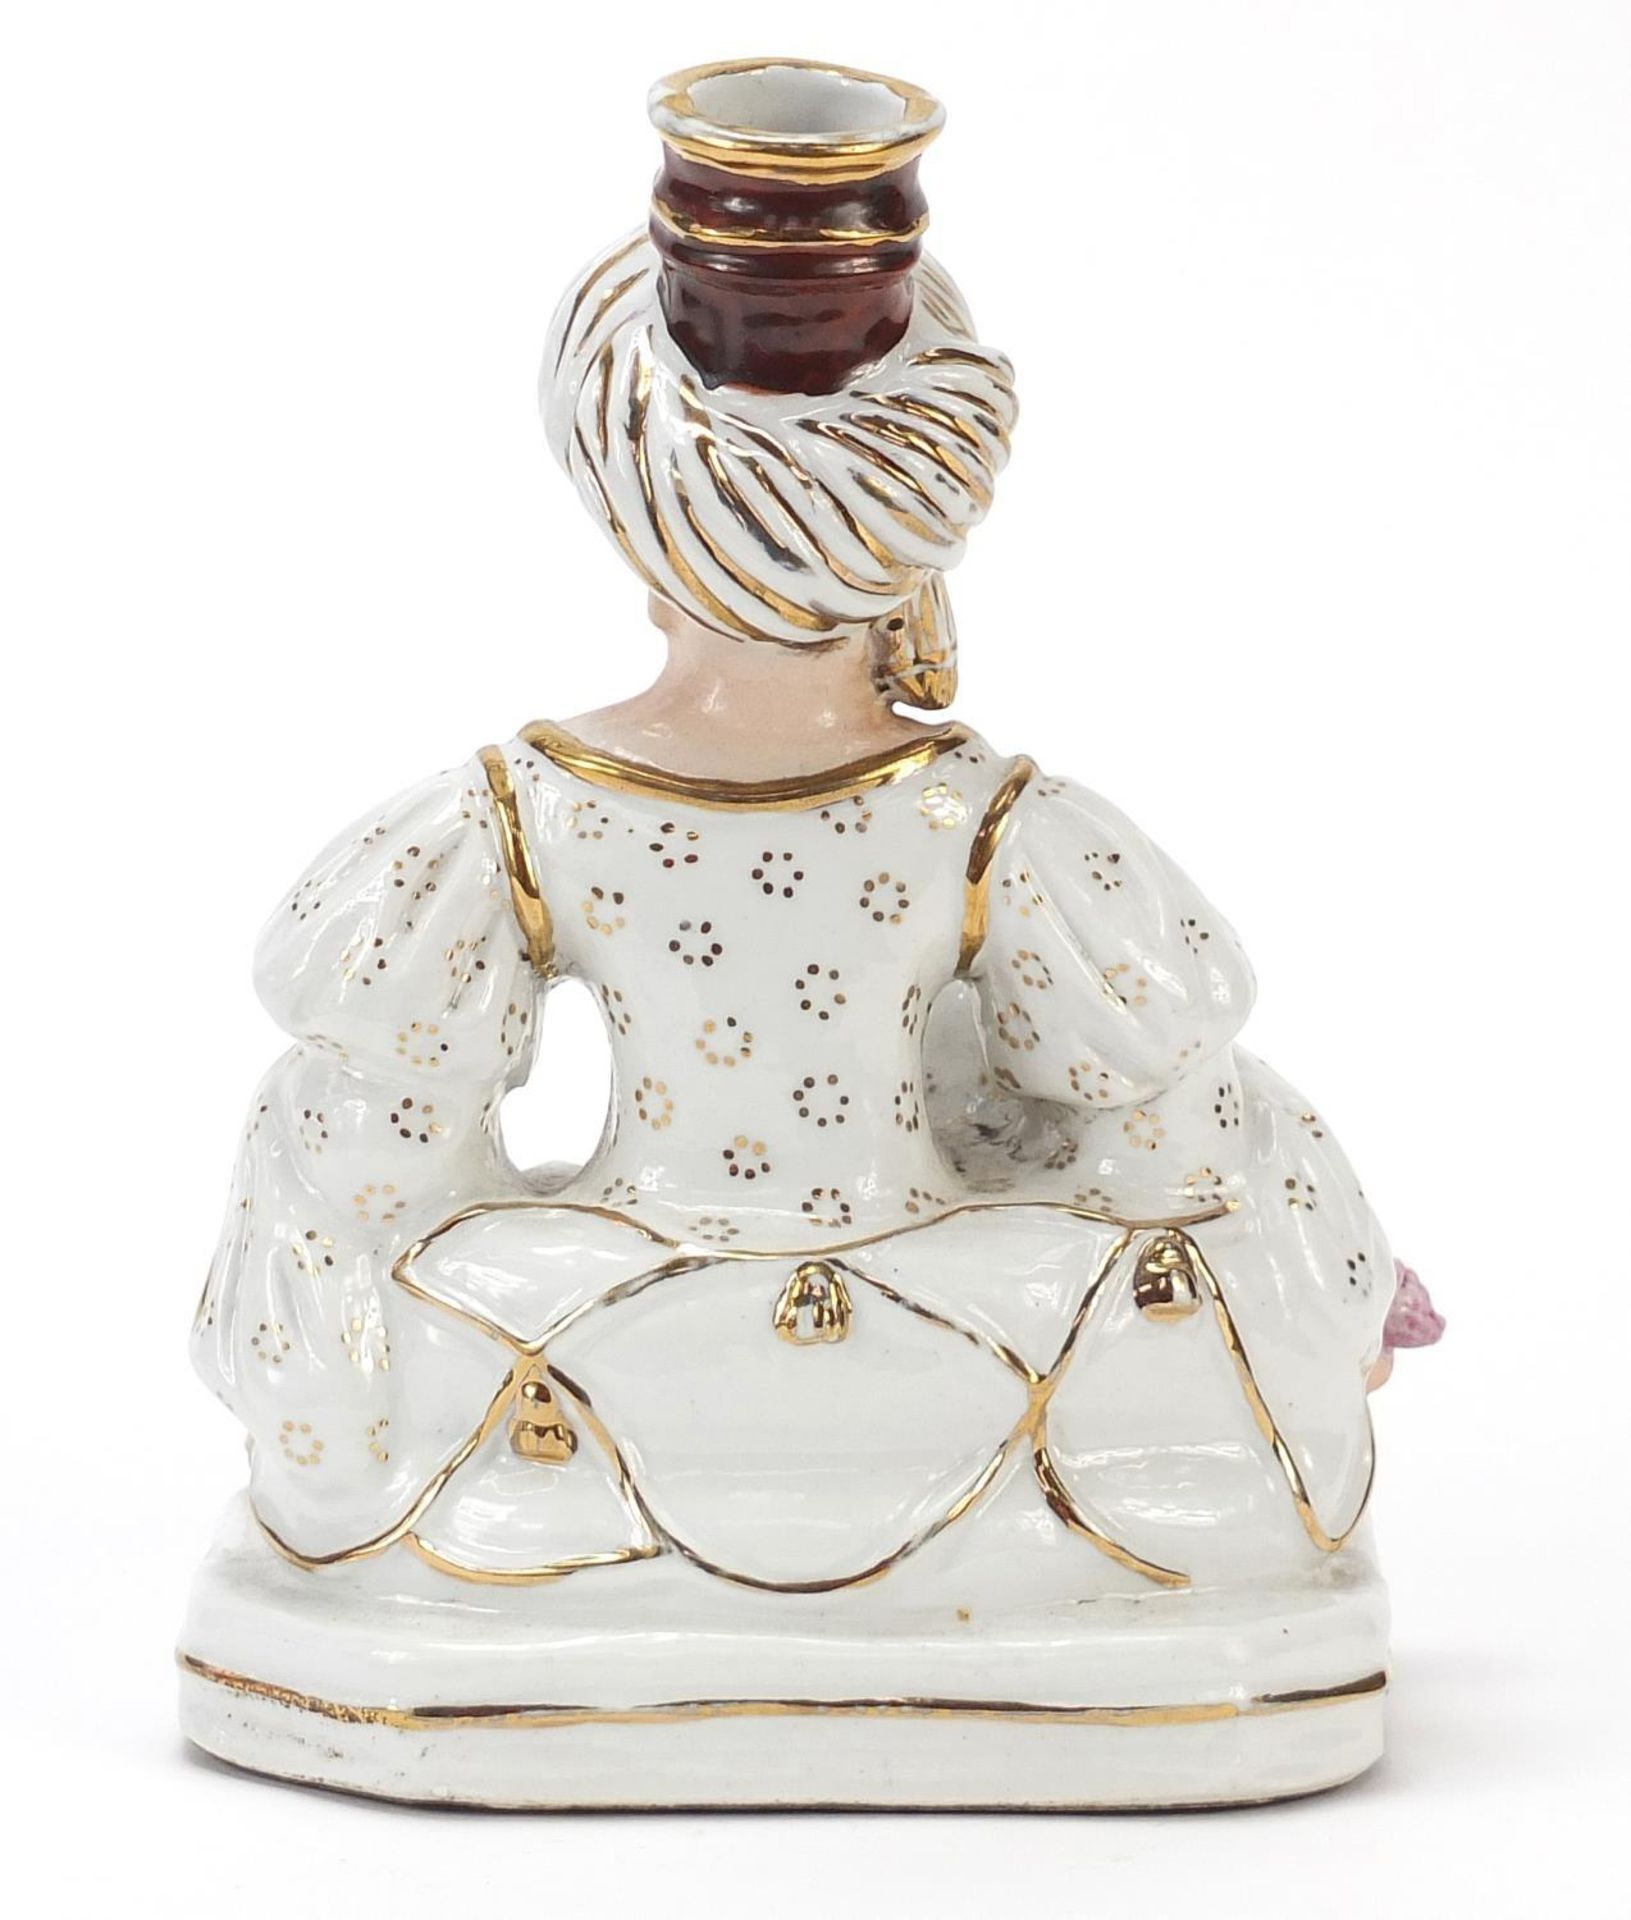 Jacob Petit, French porcelain figural candlestick of a Turkish female holding a bird and flower, - Image 3 of 7